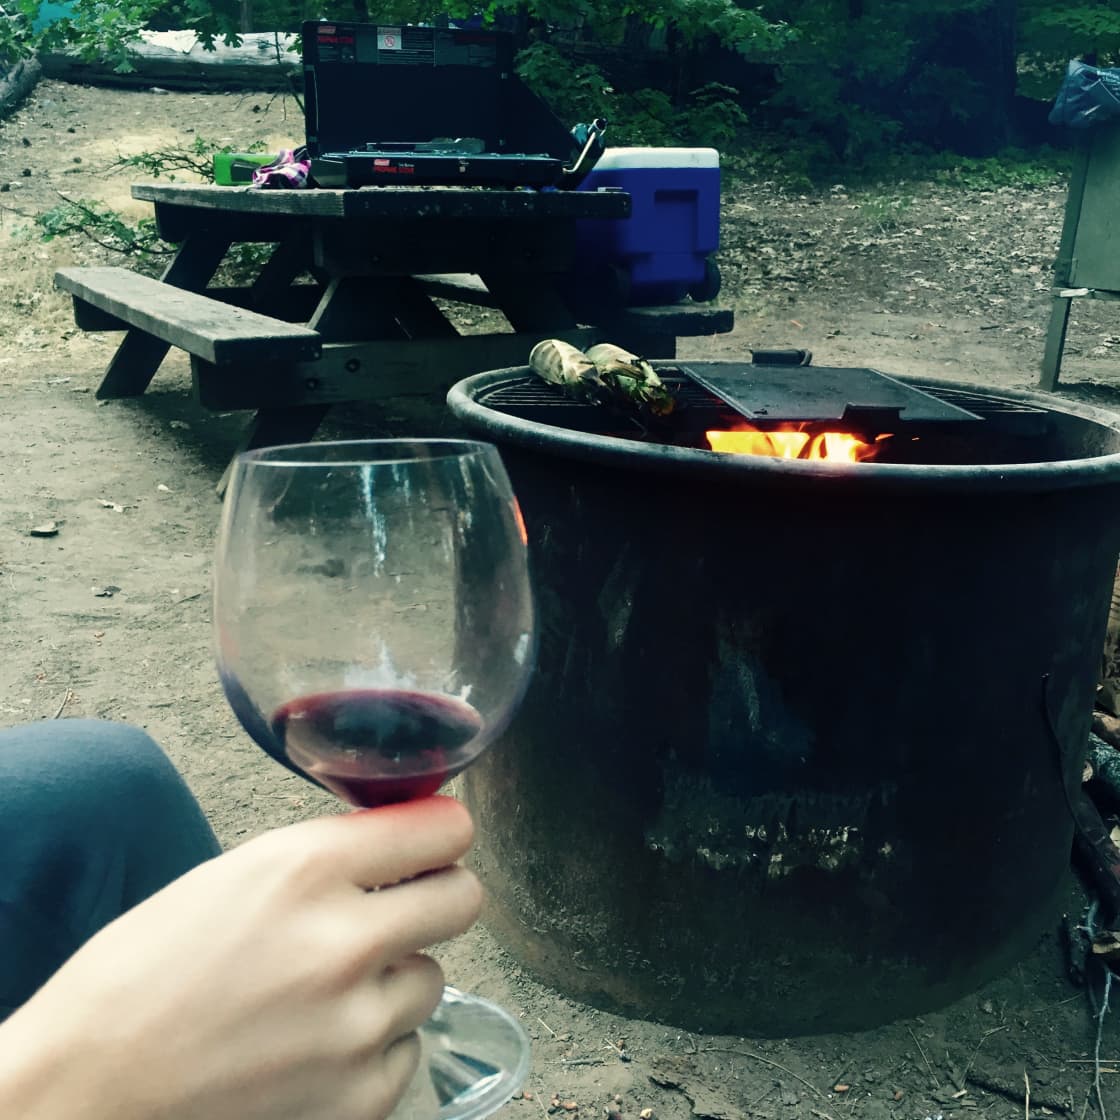 Nice size fire pits and large picnic tables. The wine was our own addition.